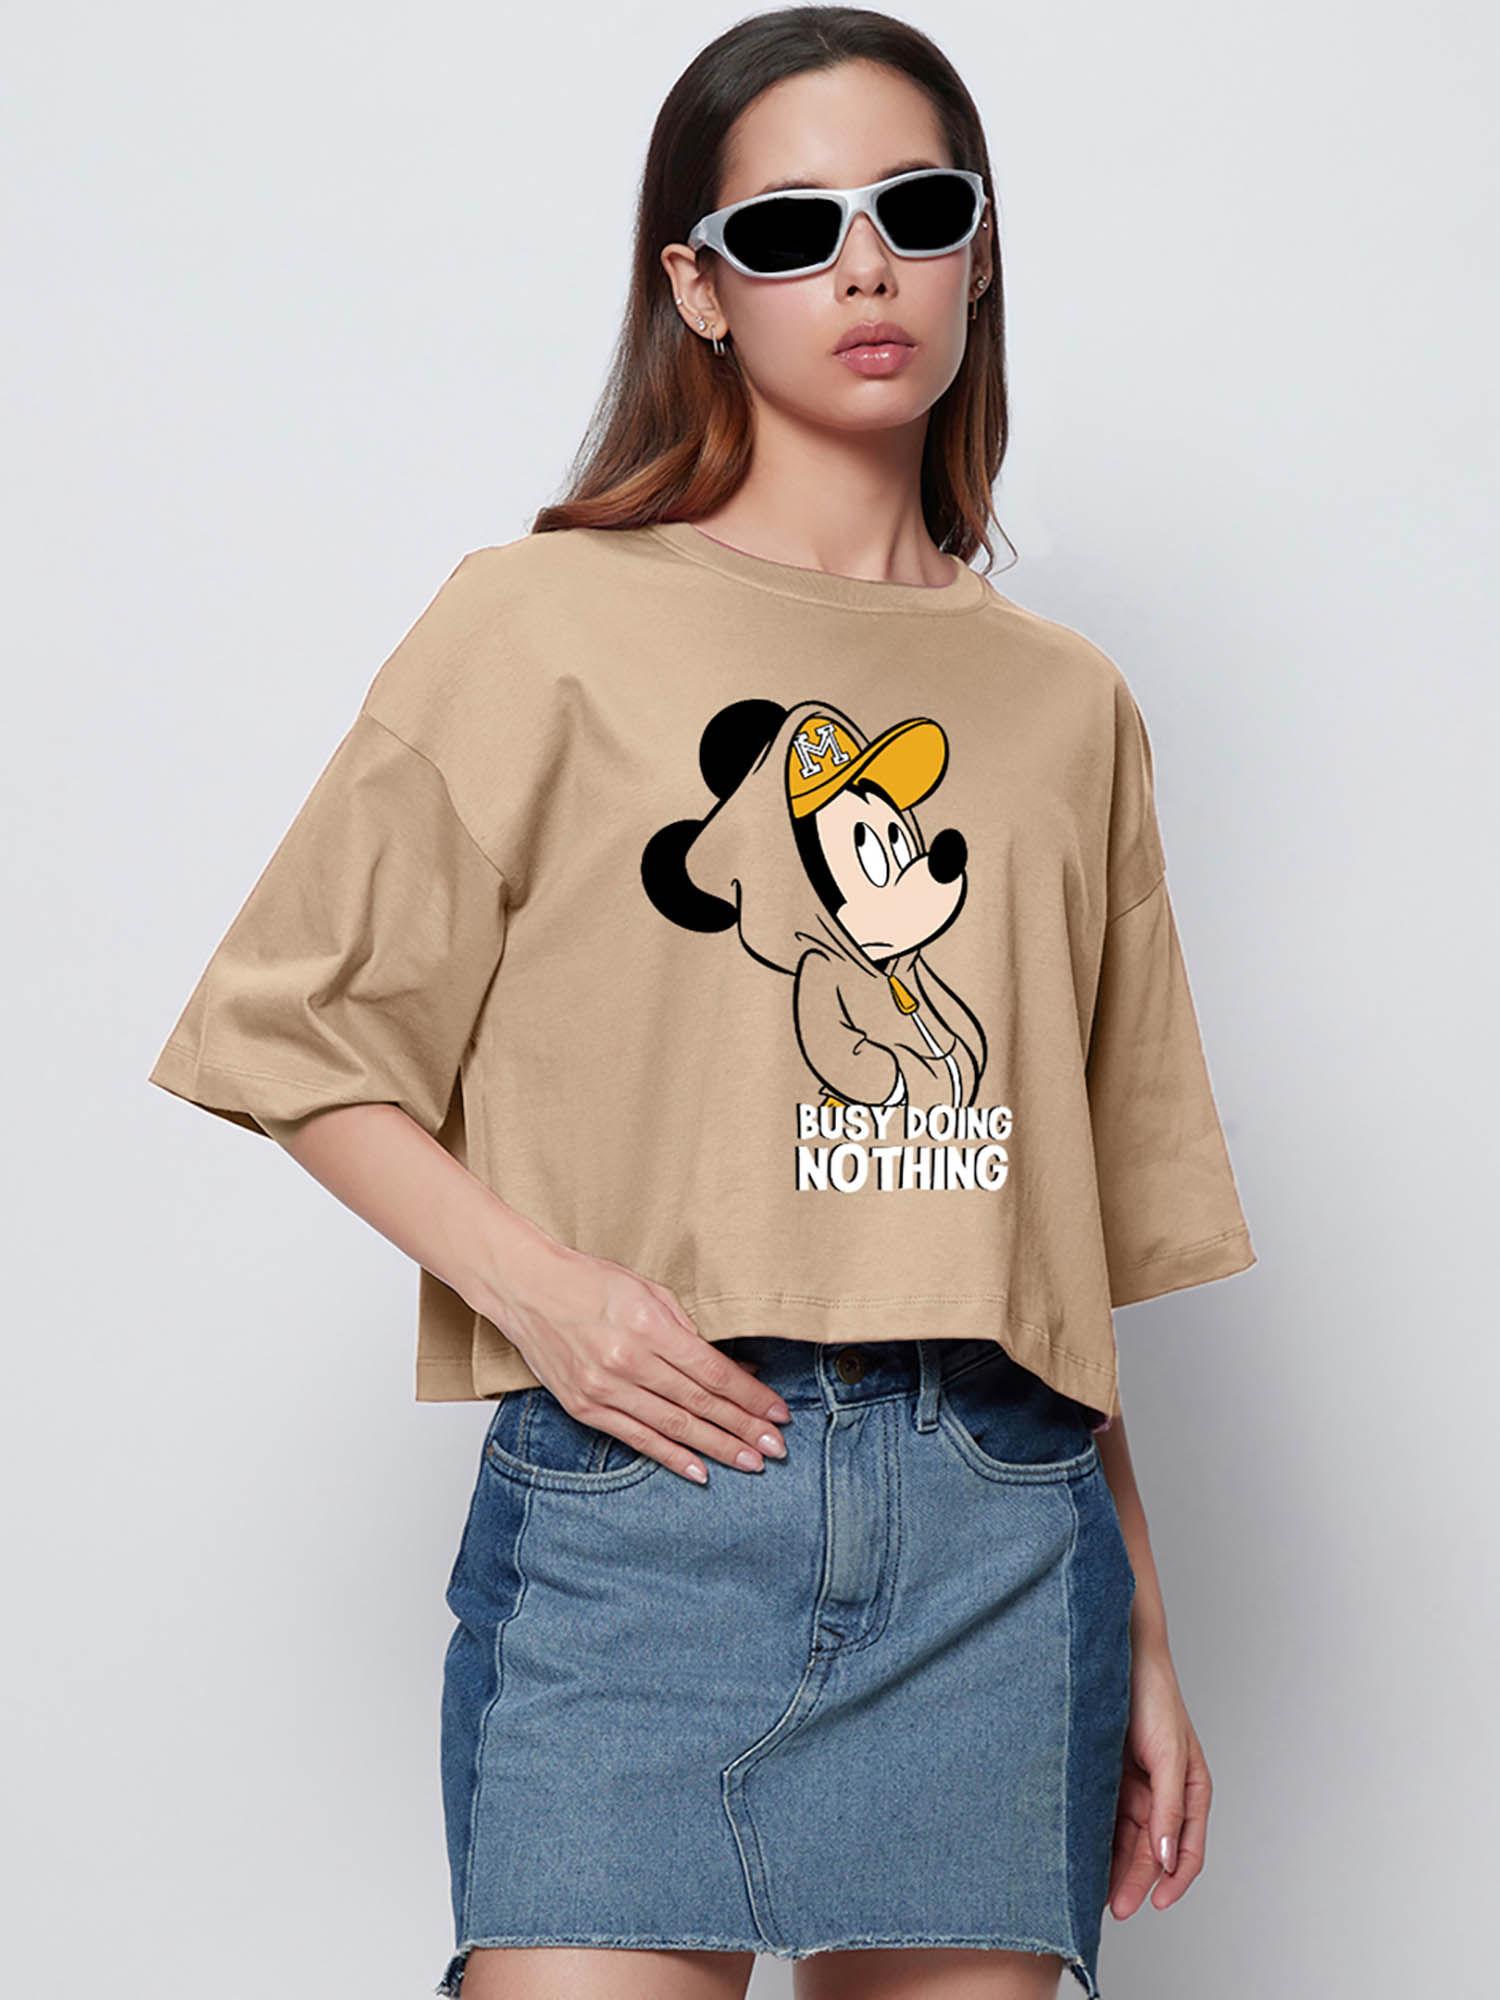 x official disney merchandise brown busy doing nothing graphic oversized t-shirt